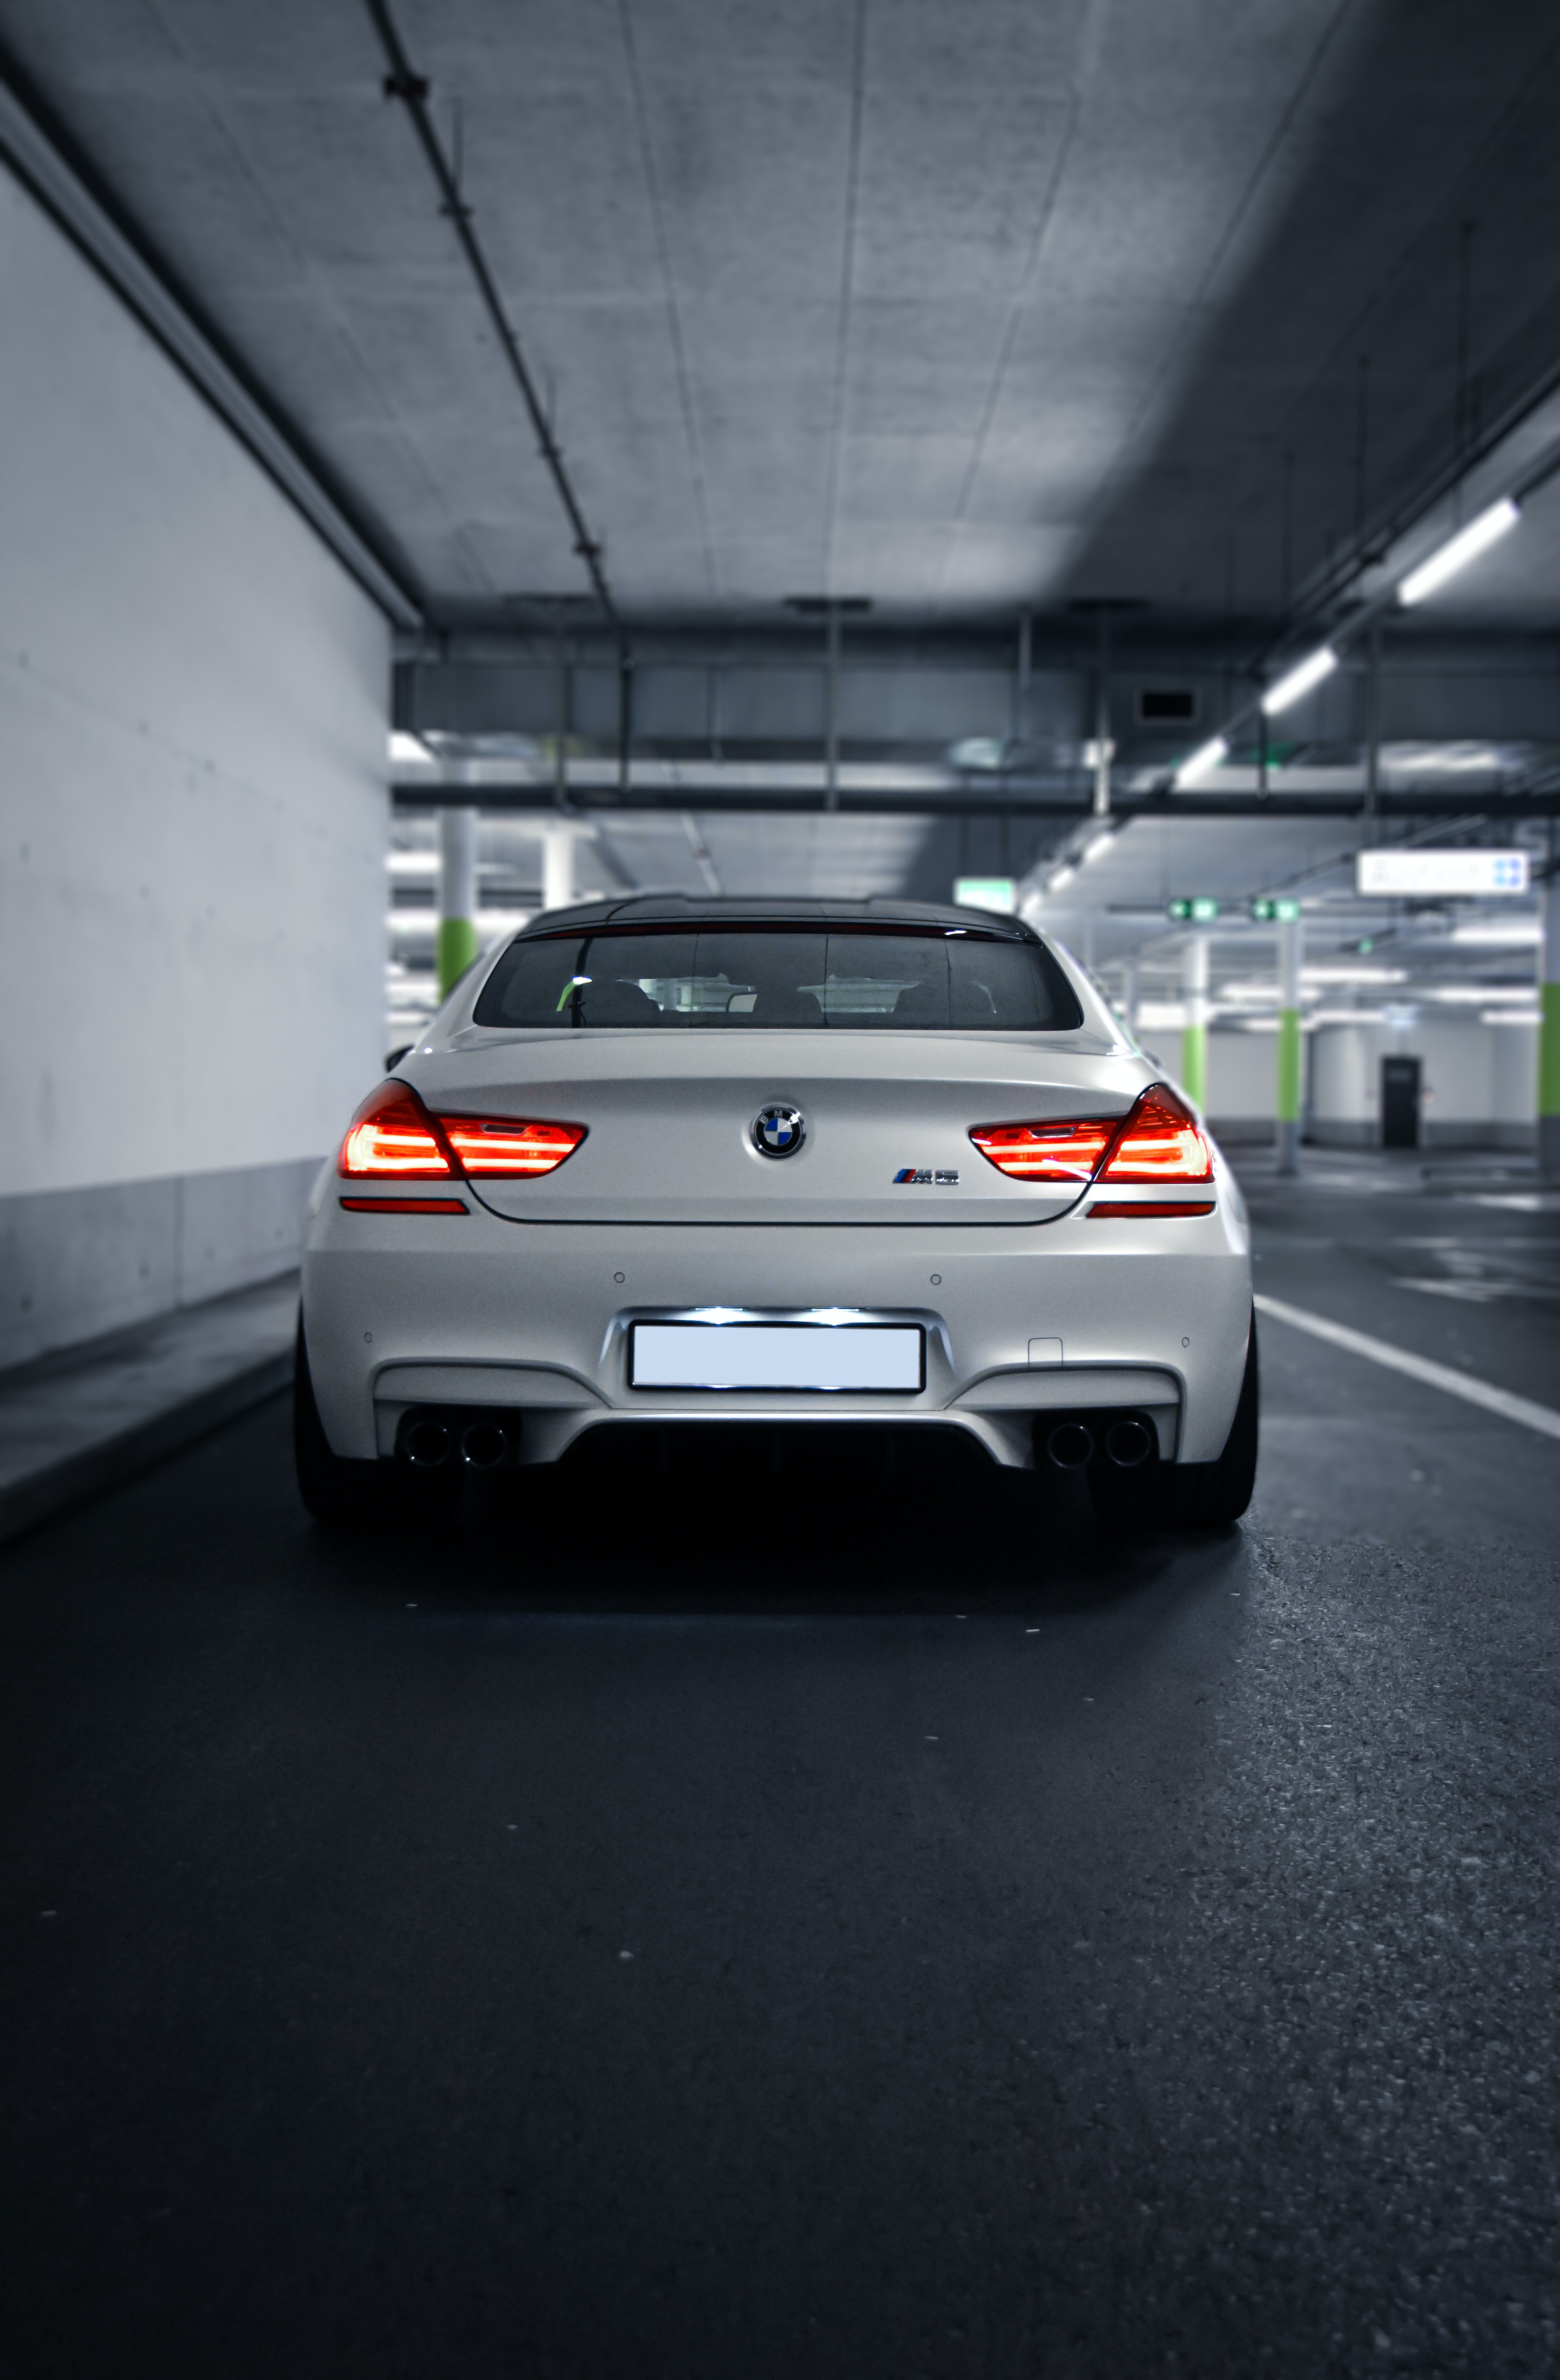 Best Bmw M6 mobile Picture